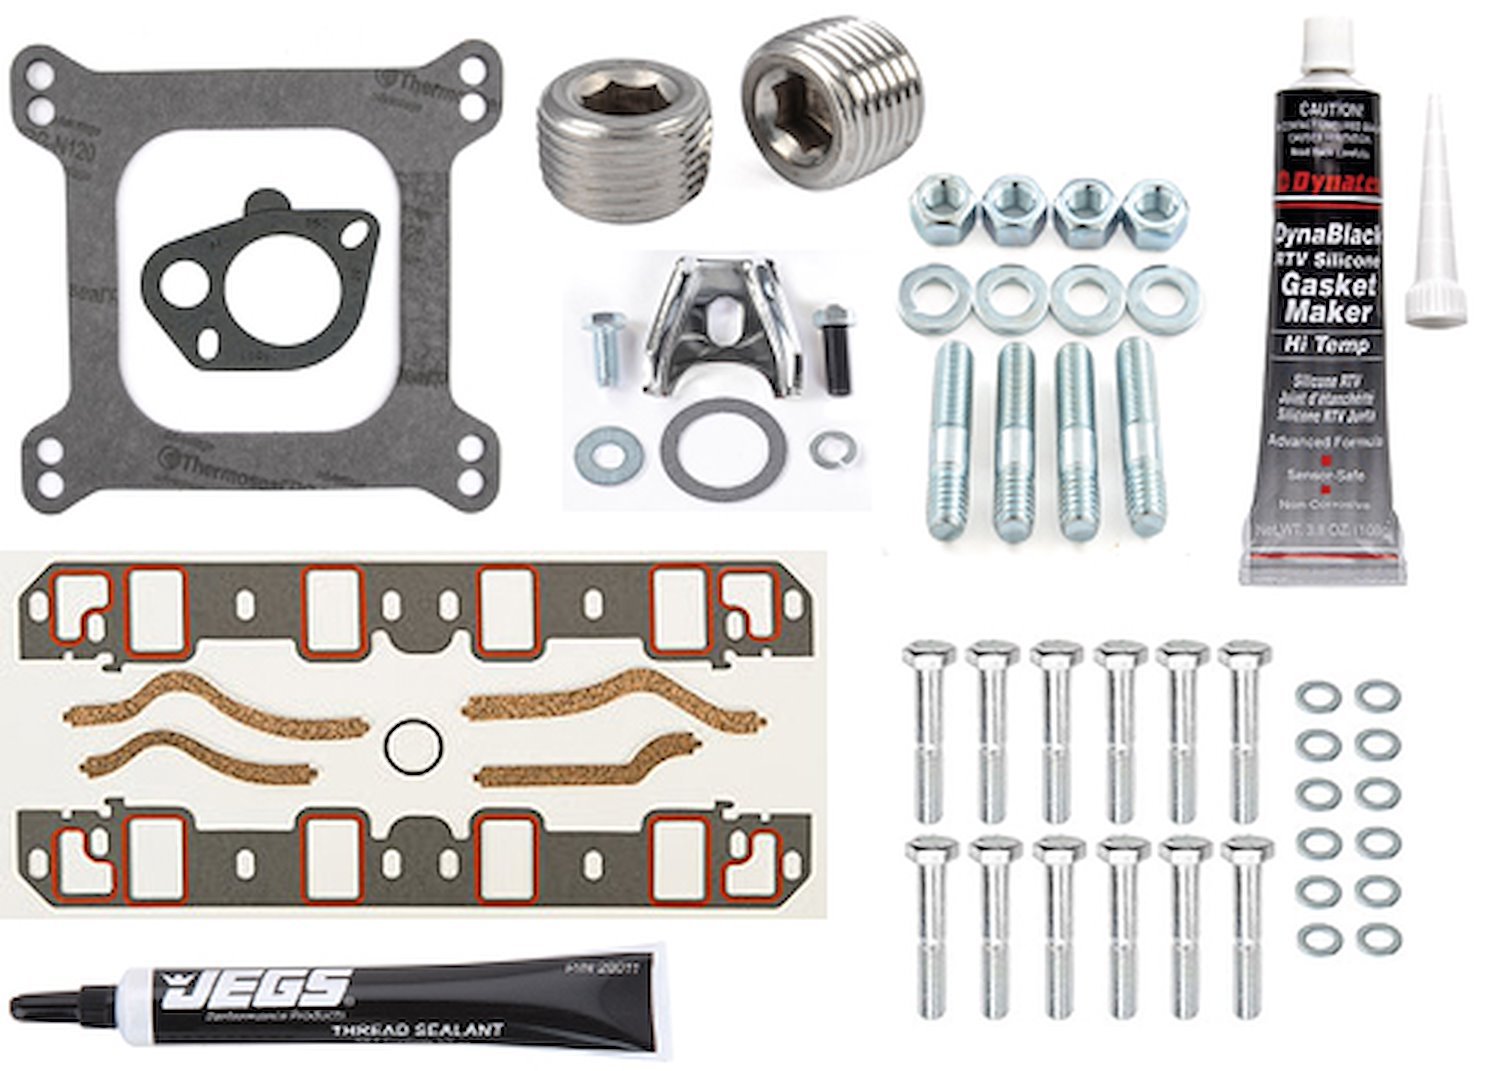 Intake Manifold Installation Kit for Small Block Ford